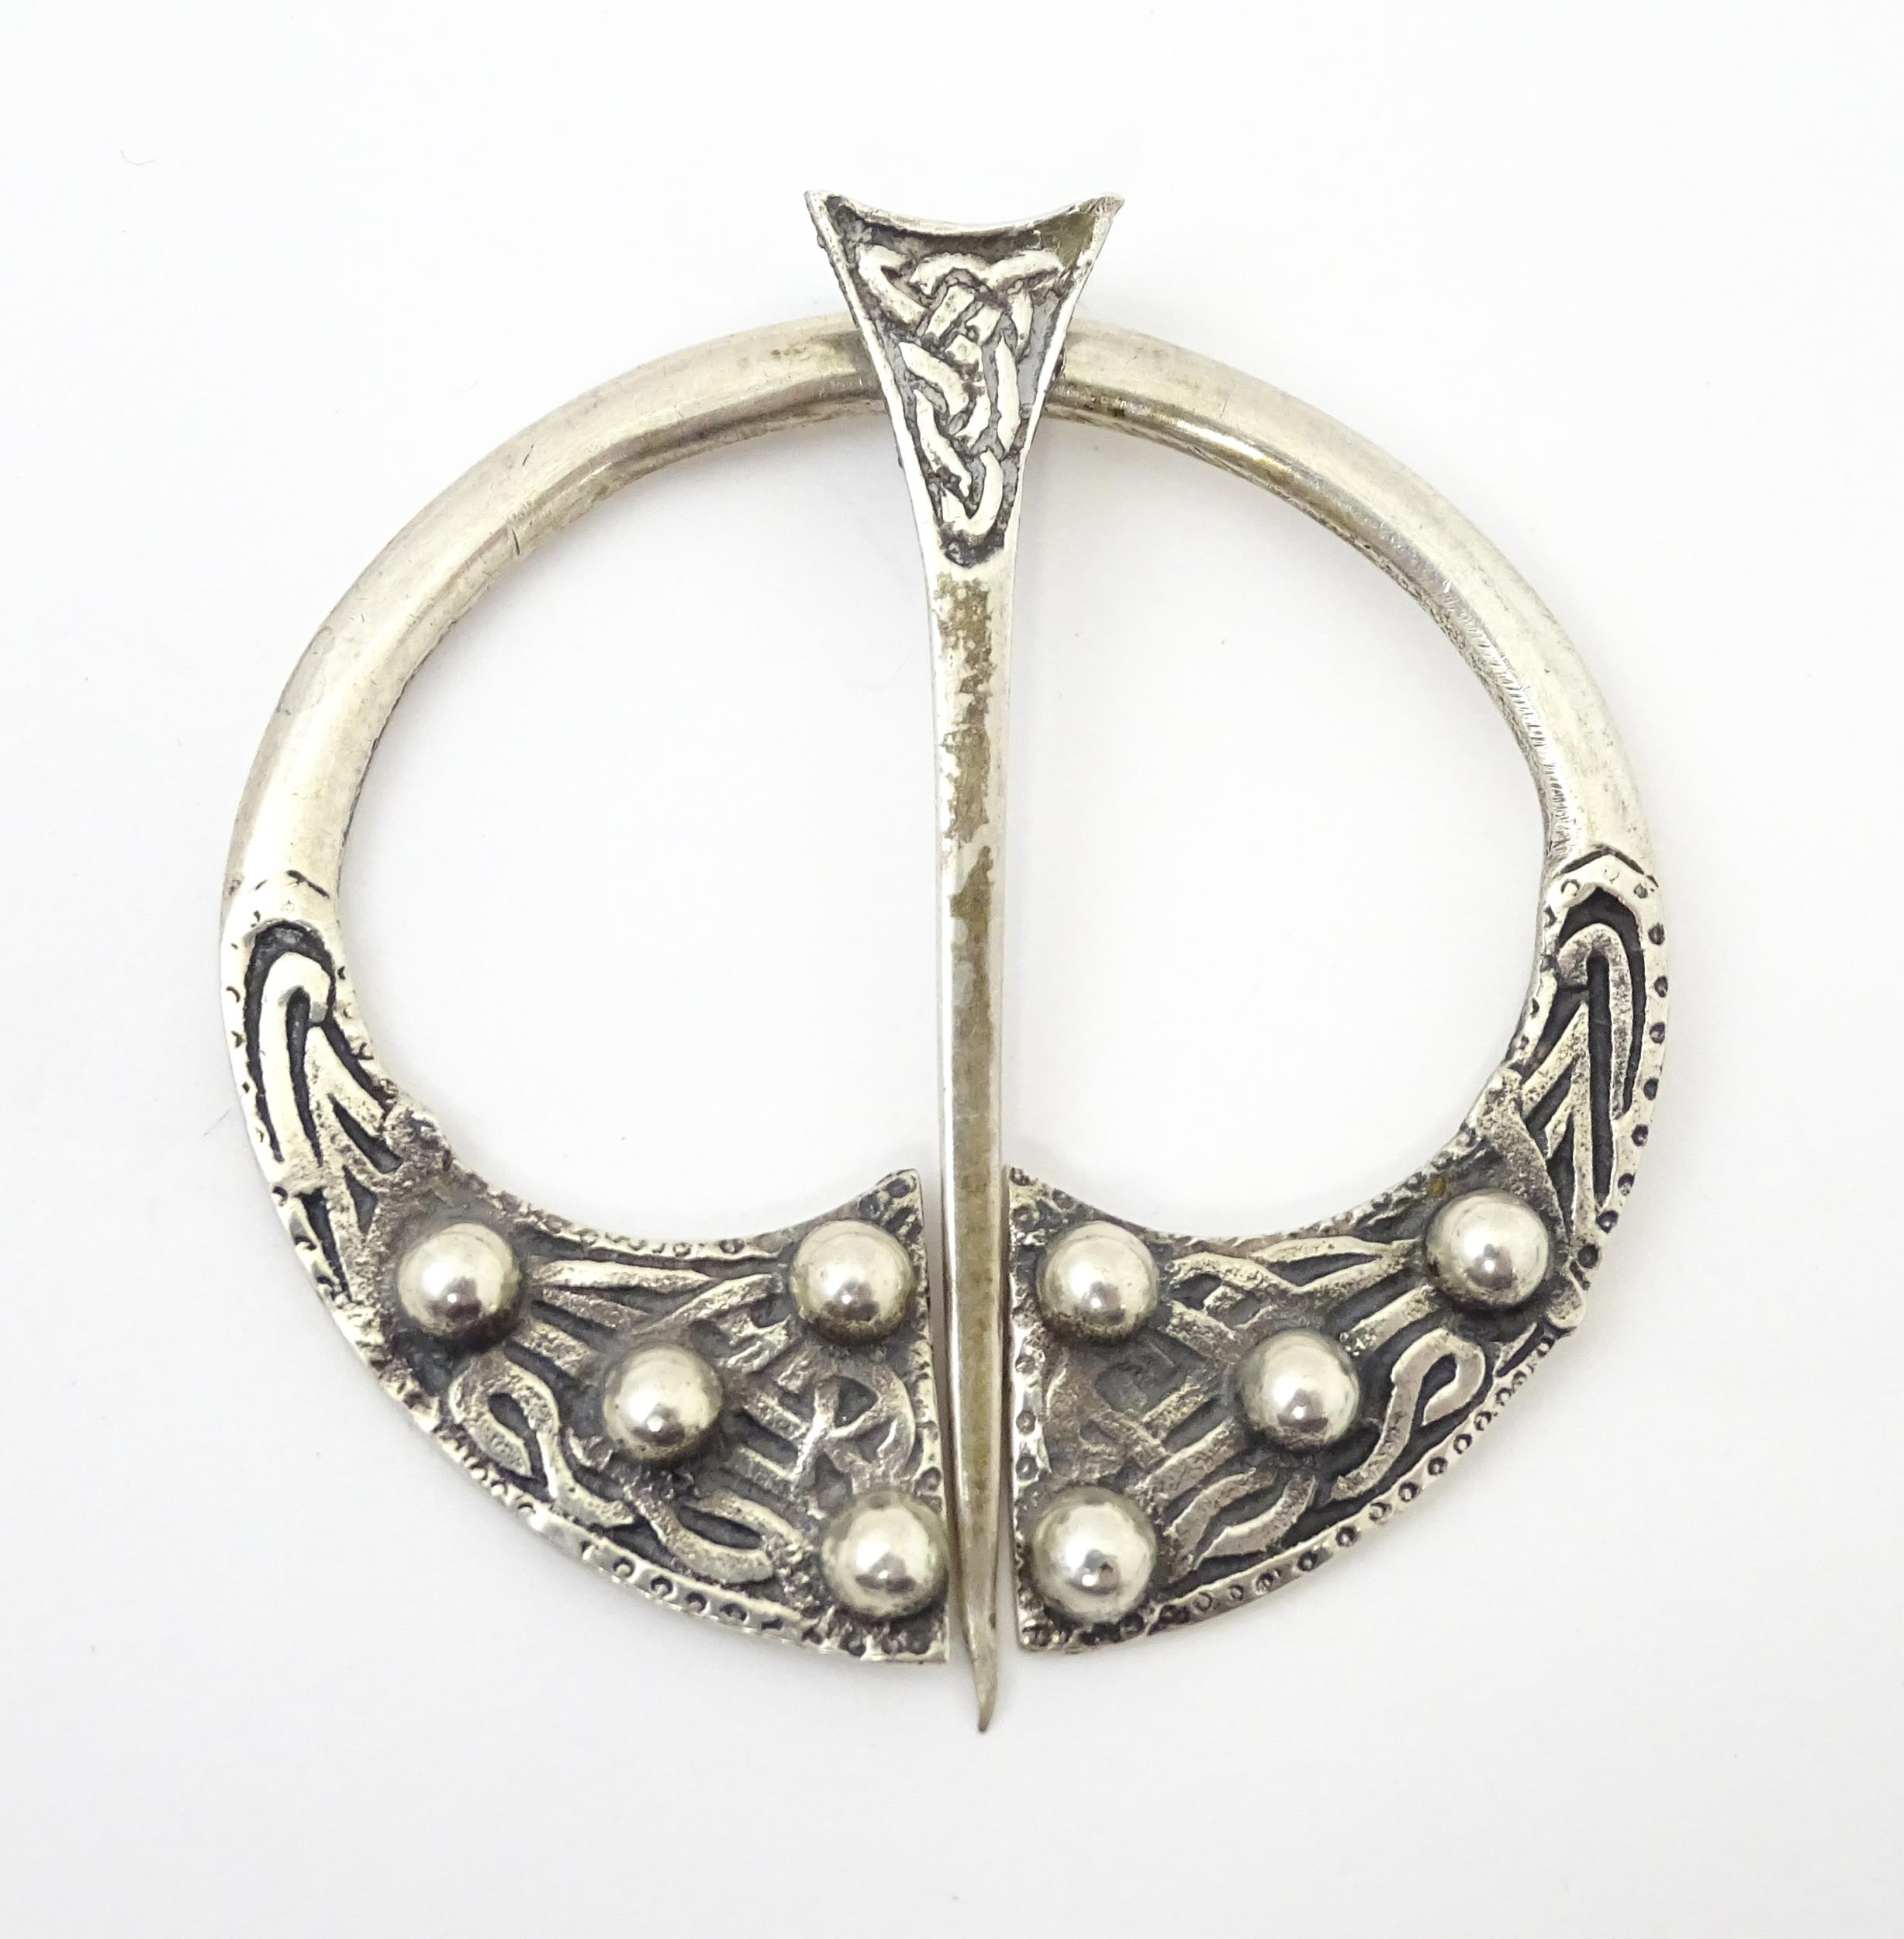 A Scottish silver penannular brooch / pin with Celtic decoration. Hallmarked Glasgow 1941 maker